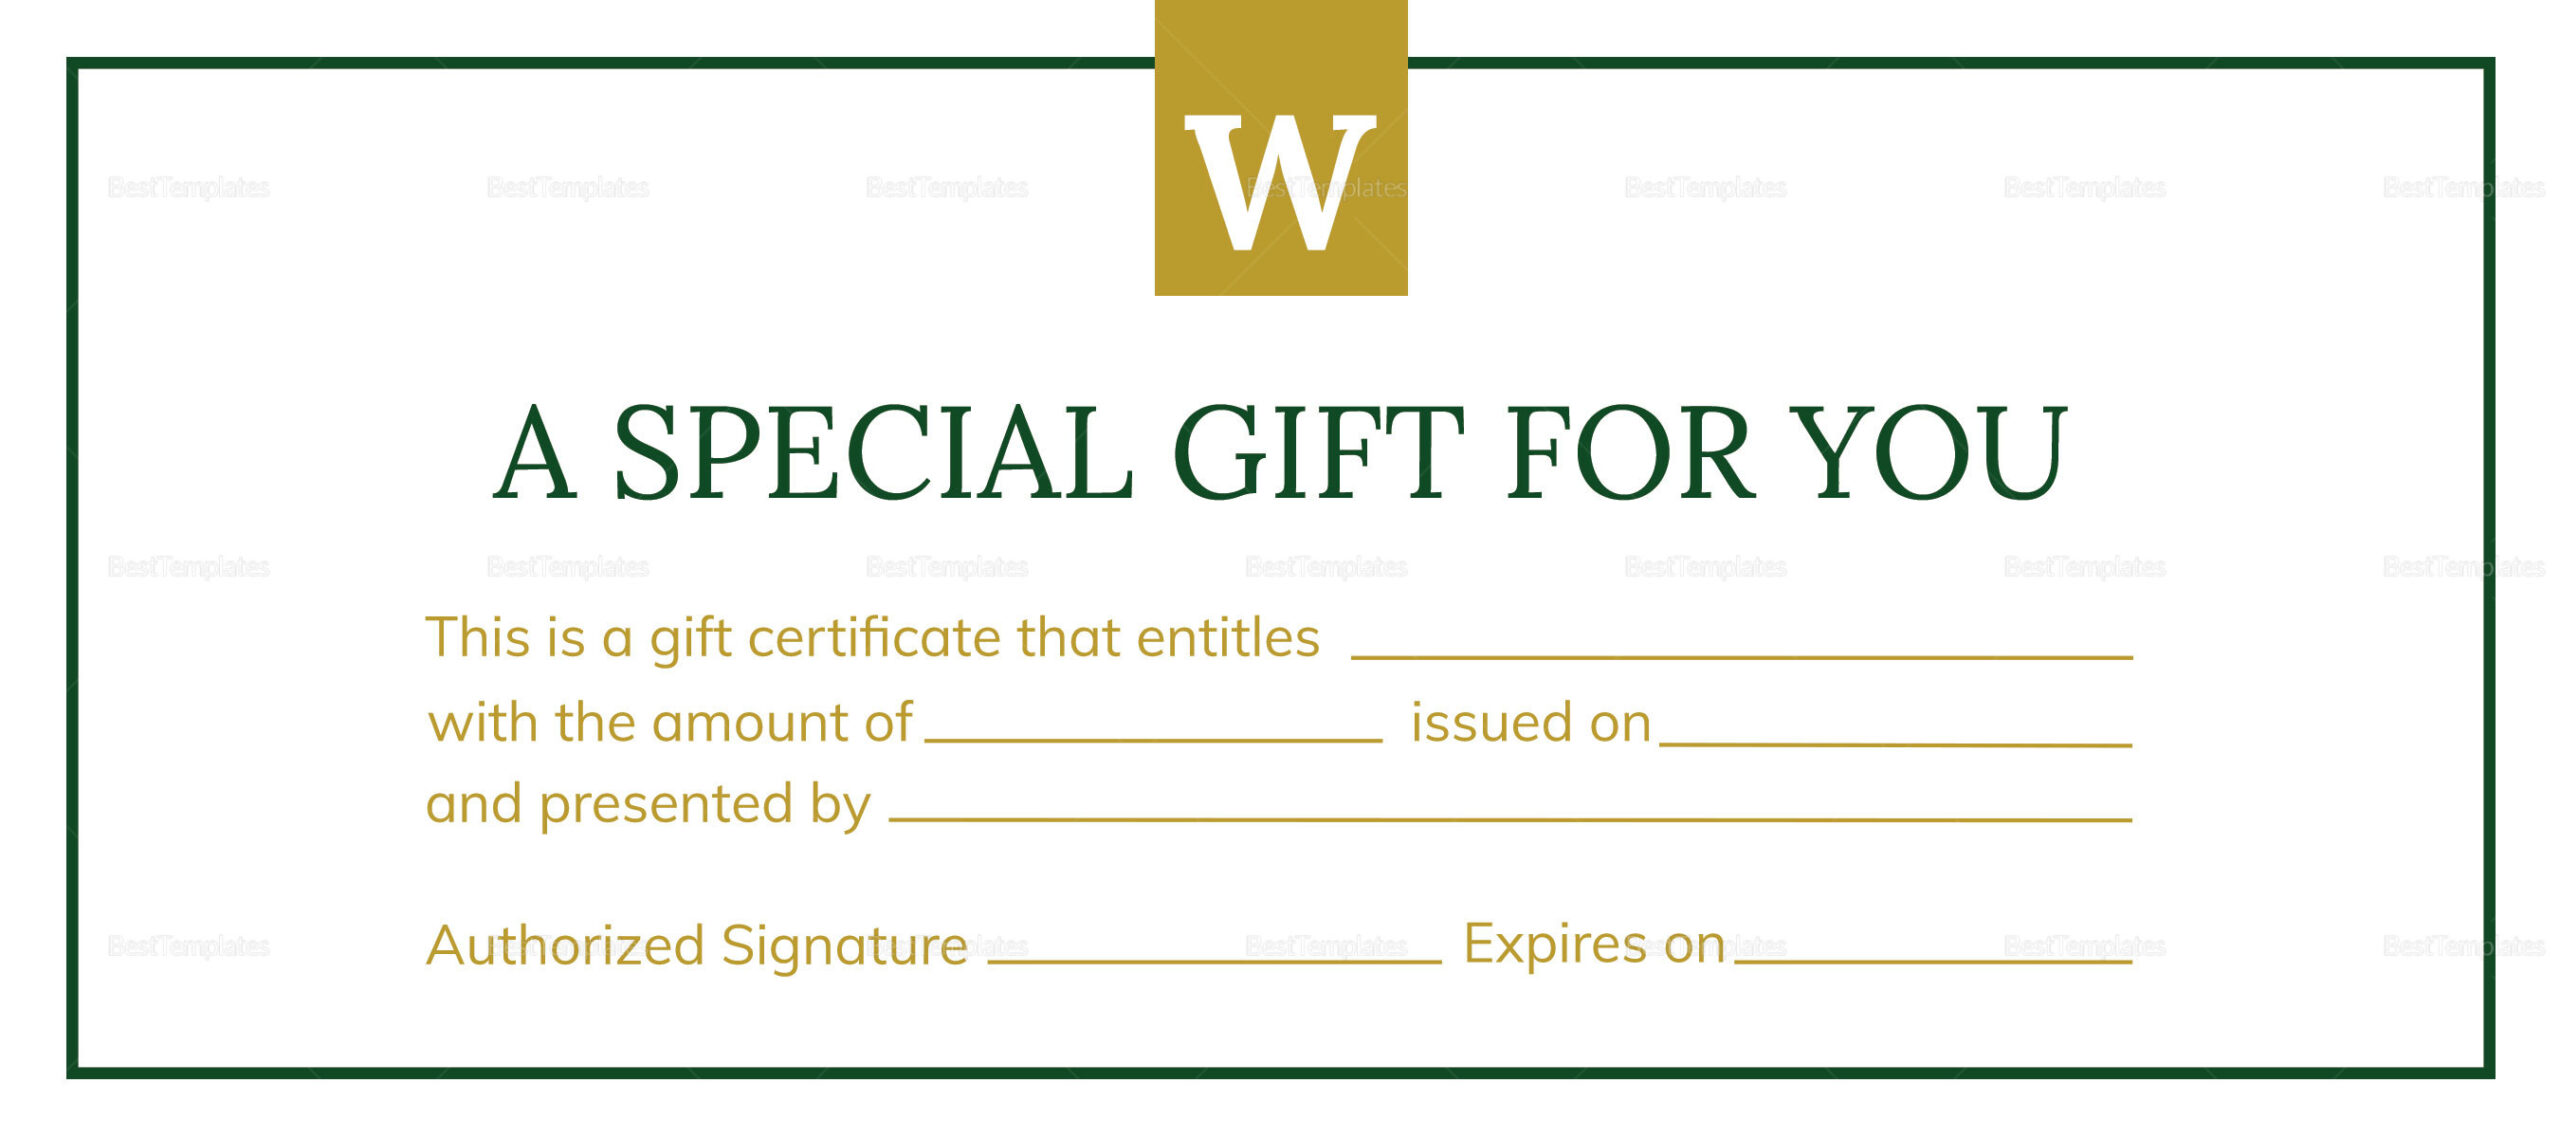 Gift Certificate Templates Indesign Illustrator Gift Coupon With Regard To Indesign Gift Certificate Template